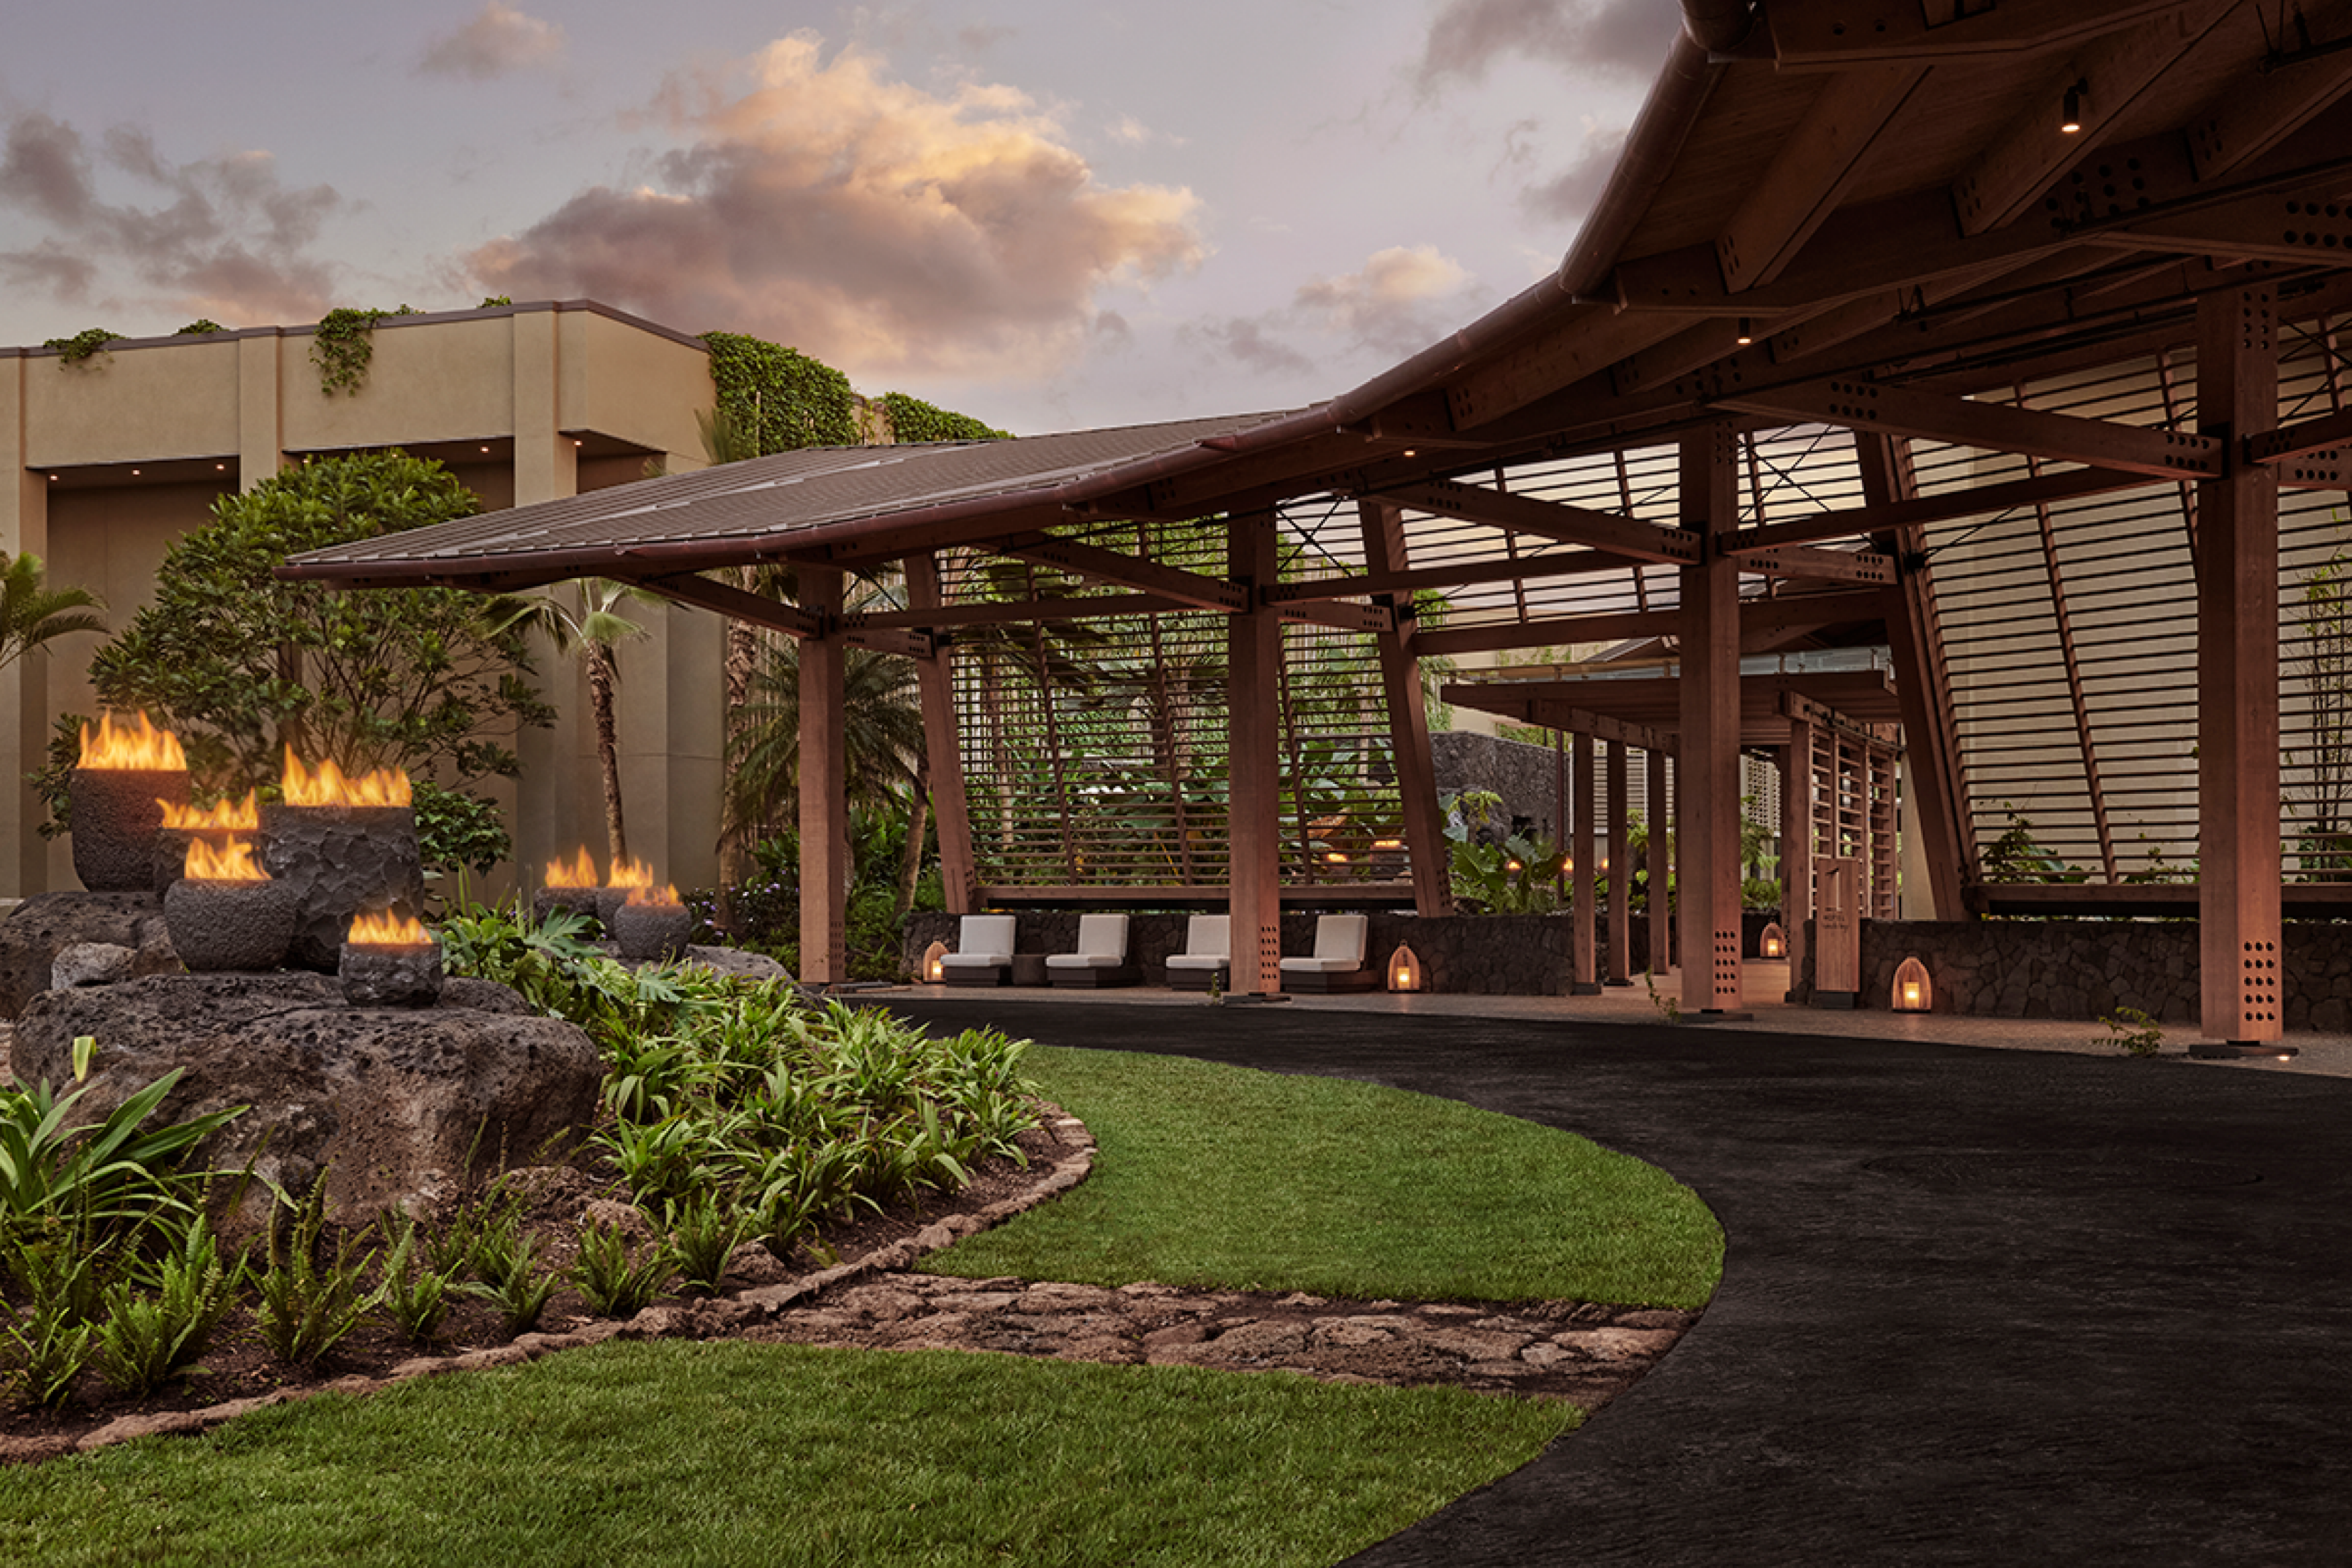 1 Hotel Hanalei Bay Entrance with fire pits and outdoor chairs